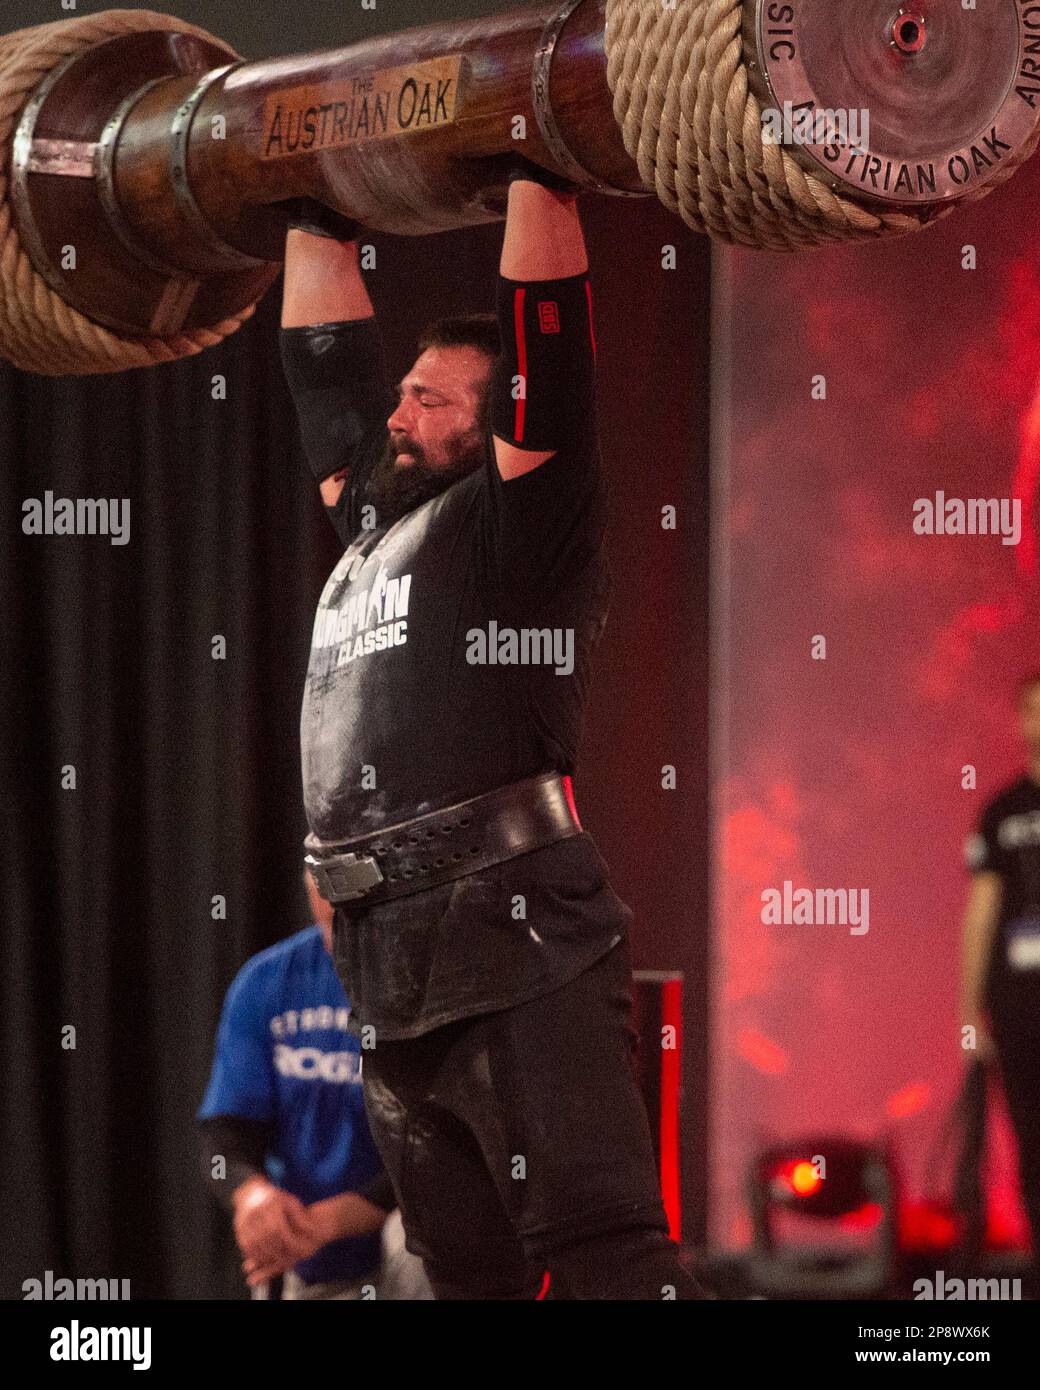 Columbus, Ohio, United States. 3th Mar, 2023. Tom Evans (USA) competes in the Austrian Oak Log Lift during the Arnold Strongman Classic in Columbus, Ohio. Credit: Brent Clark/Alamy Live News Stock Photo